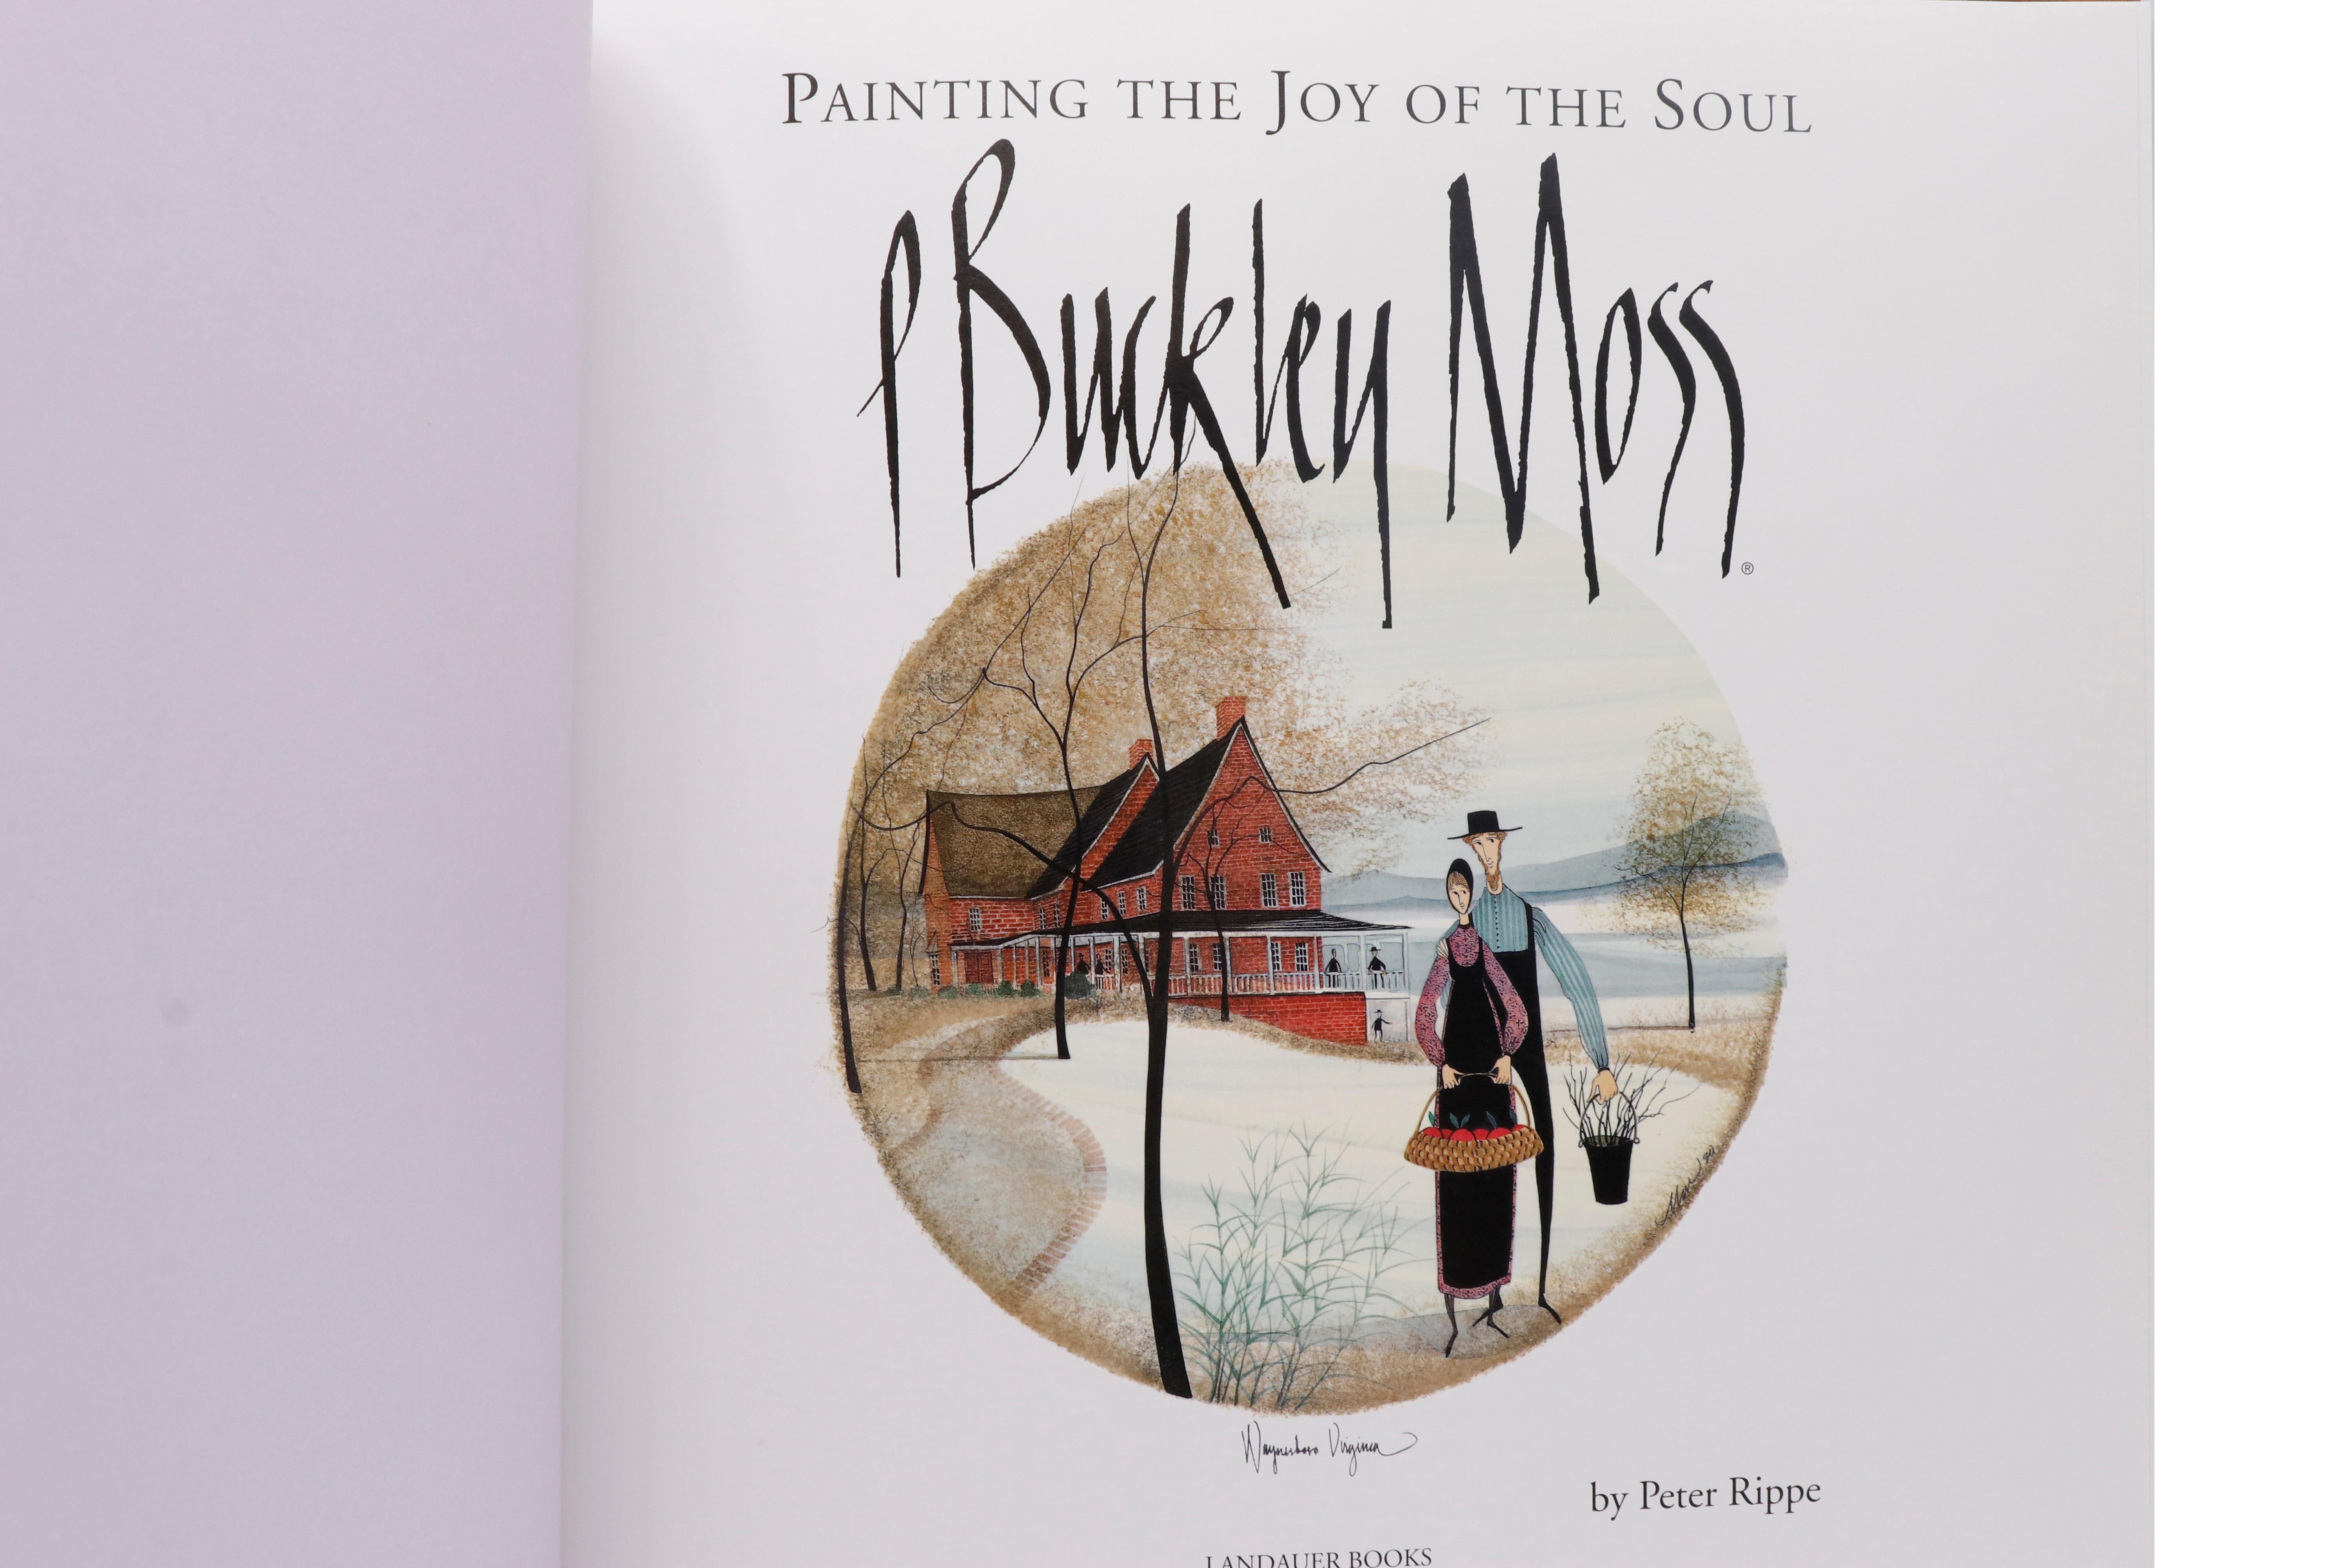 P Buckley Moss, Painting the Joy of the Soul by Peter Rippe. First edition, published in 1997 by Landauer Books. Hardcover book with dustjacket, illustrated, 168 pages.